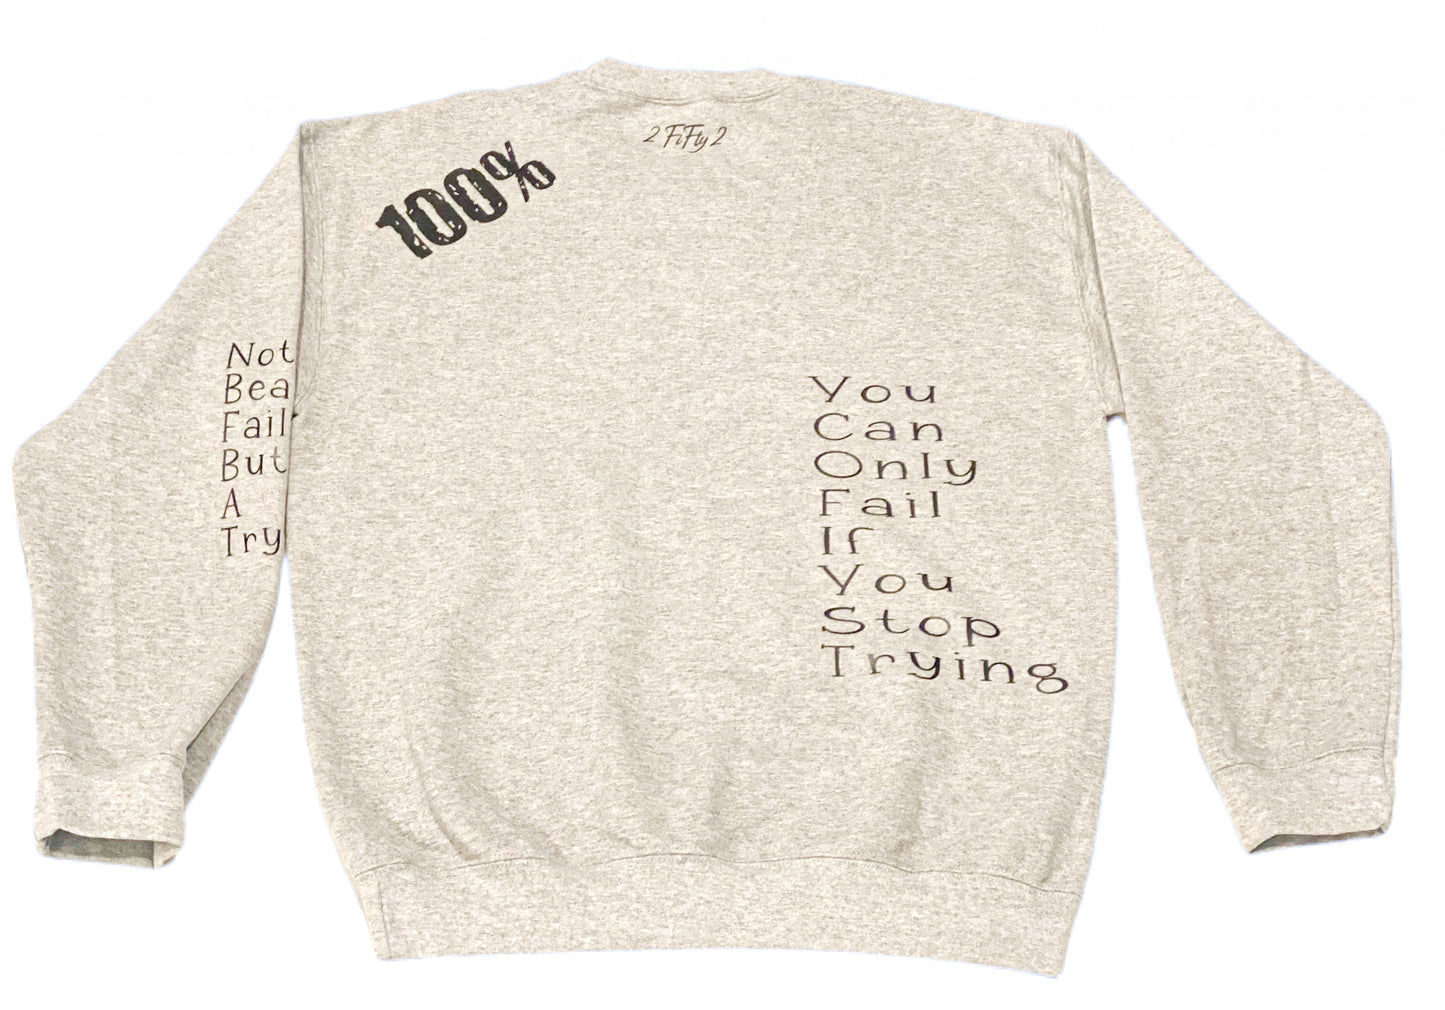 Mens crew sweatshirt (I can do all things) - 2fifty2